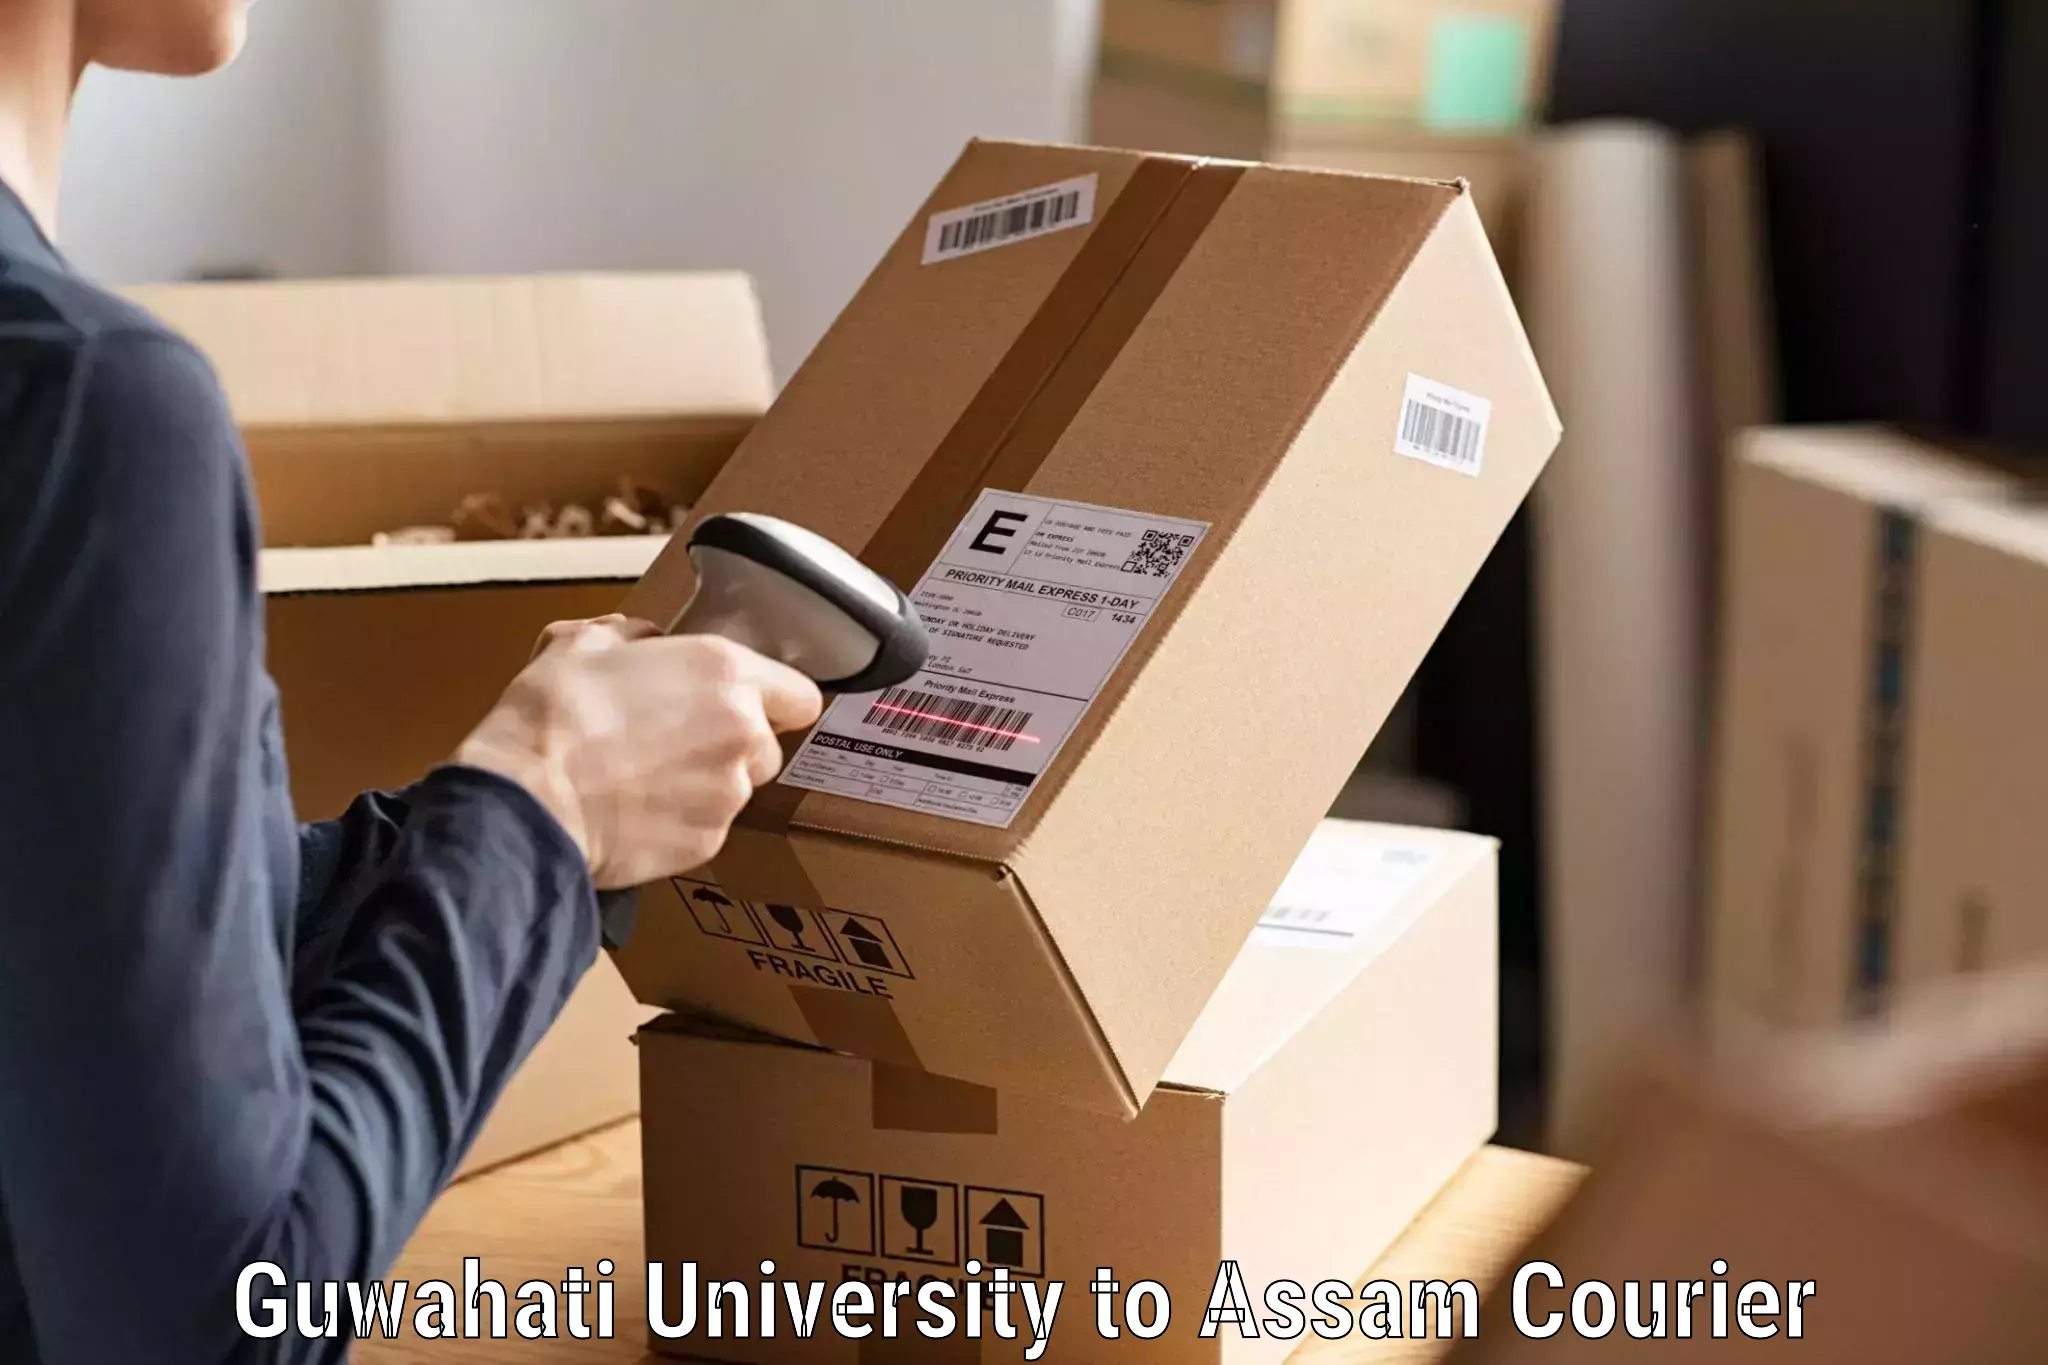 Expedited parcel delivery Guwahati University to Guwahati University